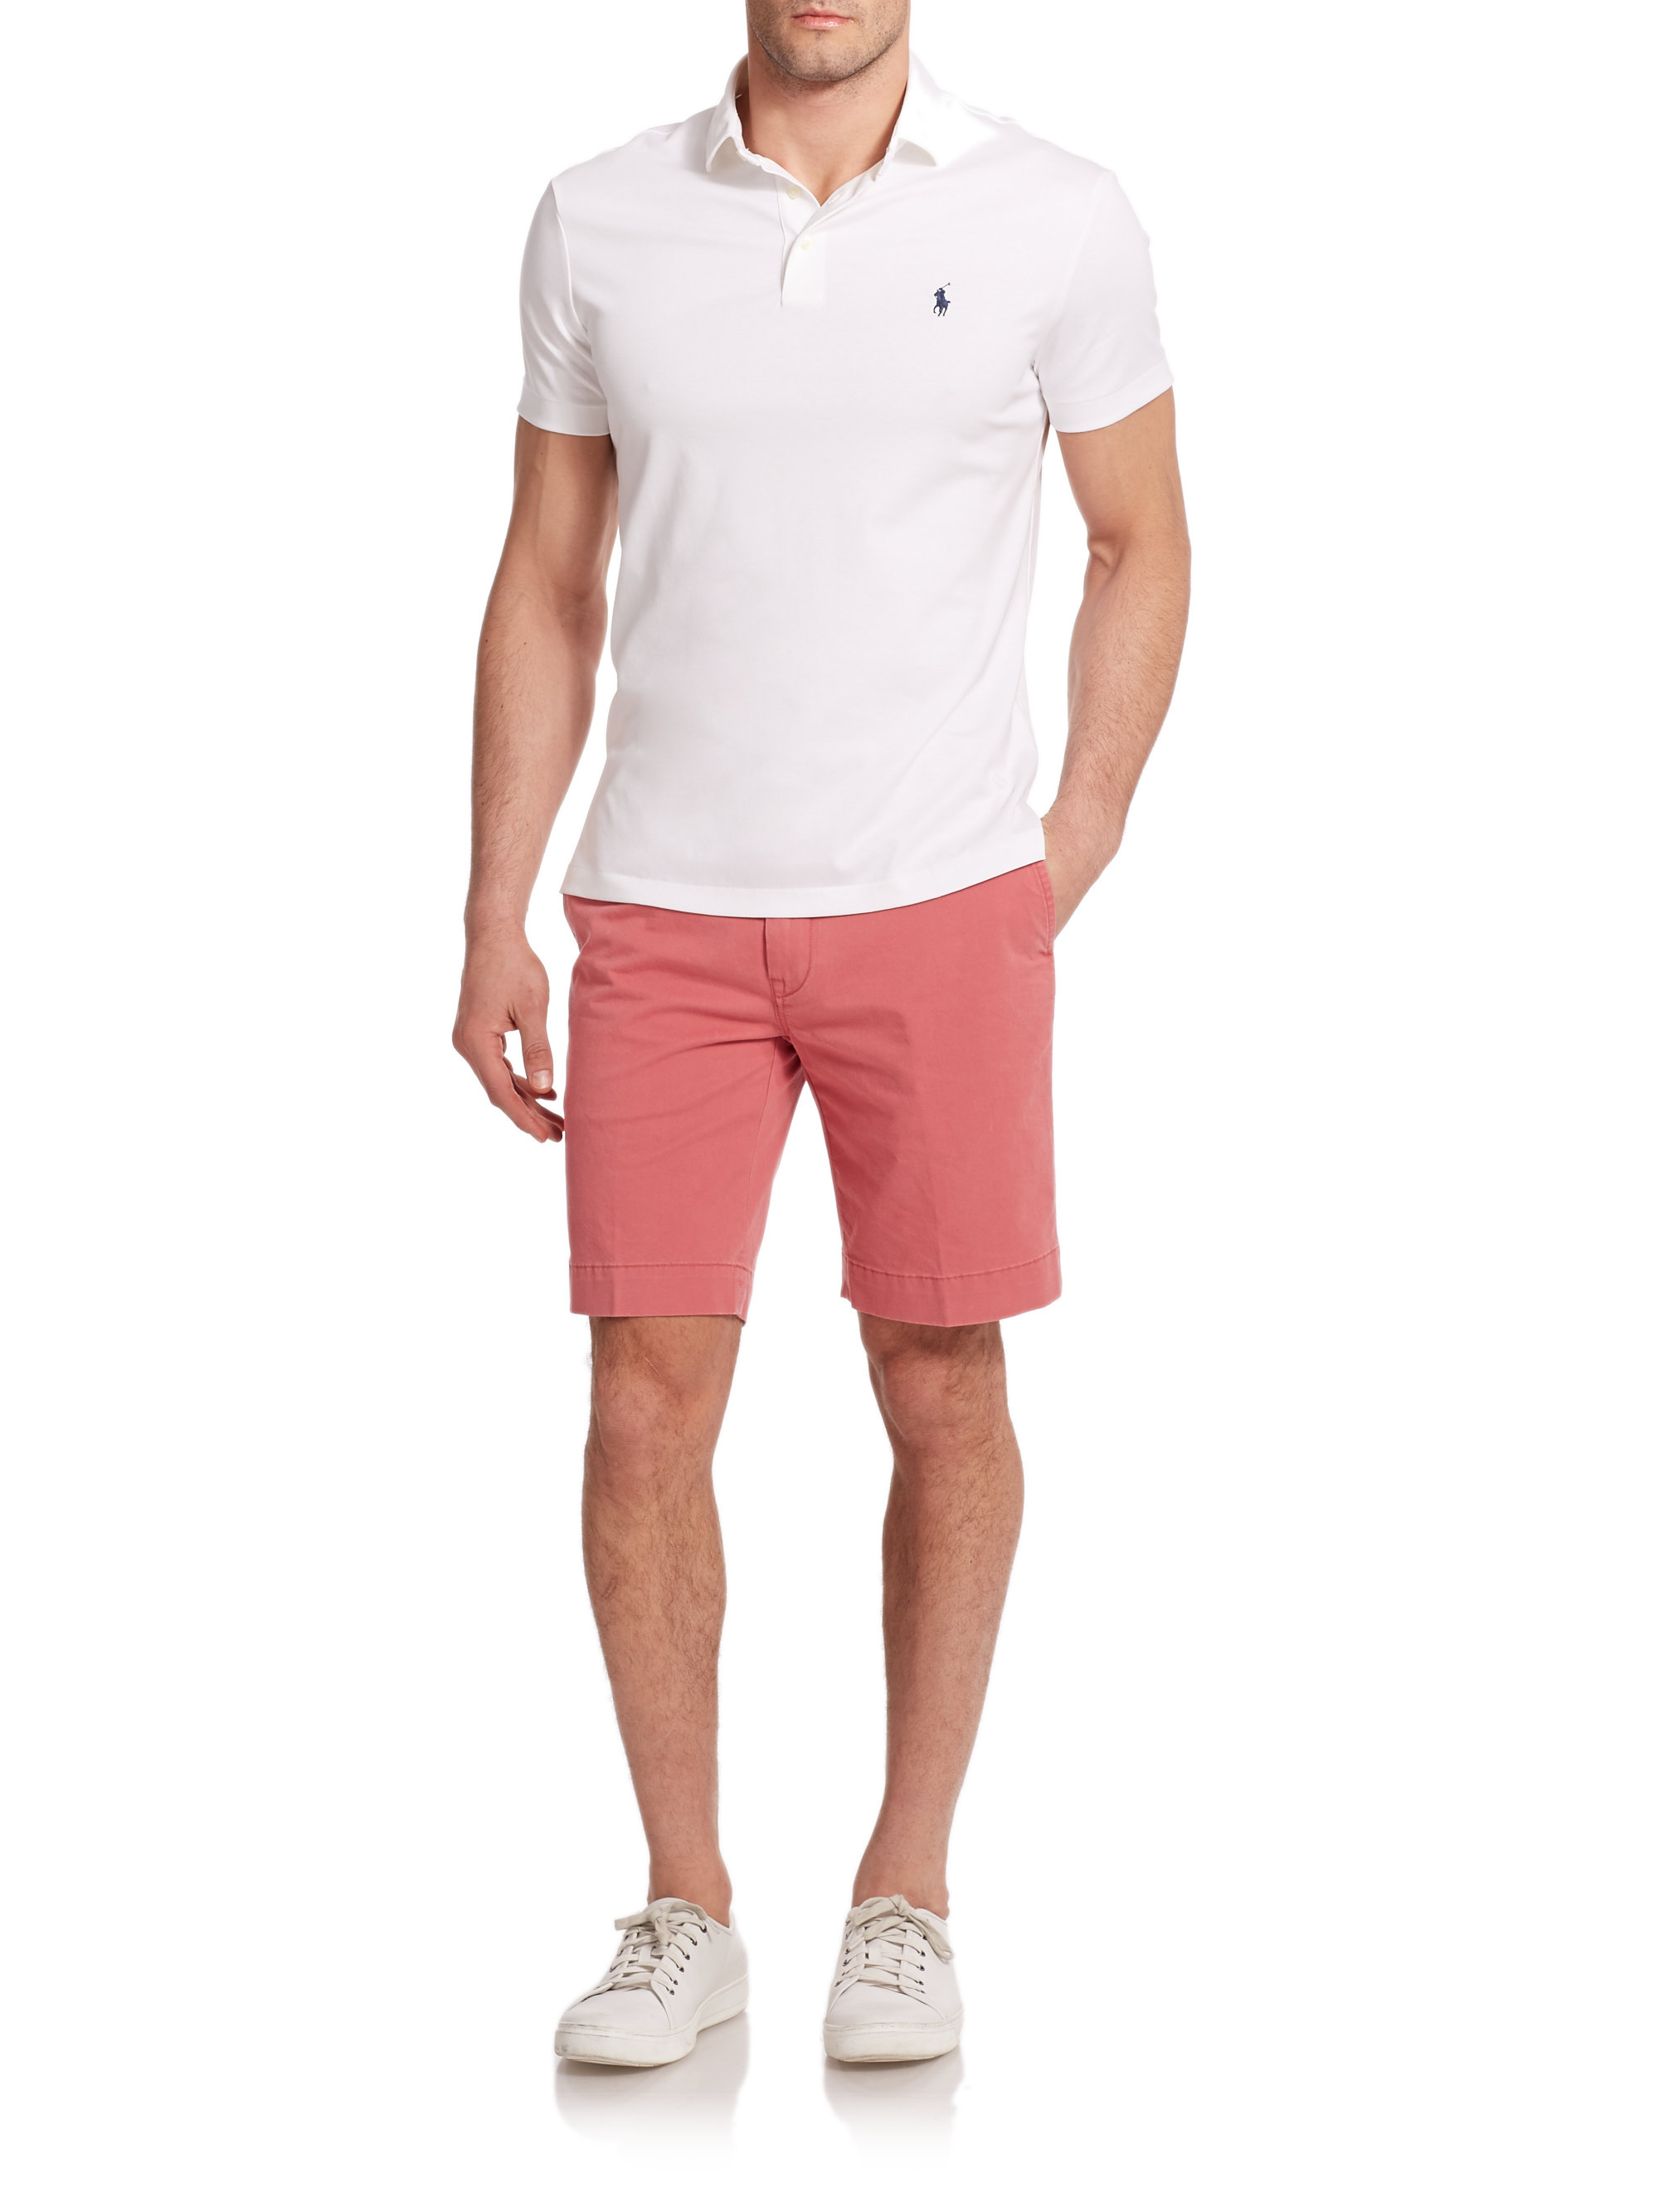 Lyst - Polo Ralph Lauren Classic-Fit Lightweight Chino Shorts in Pink